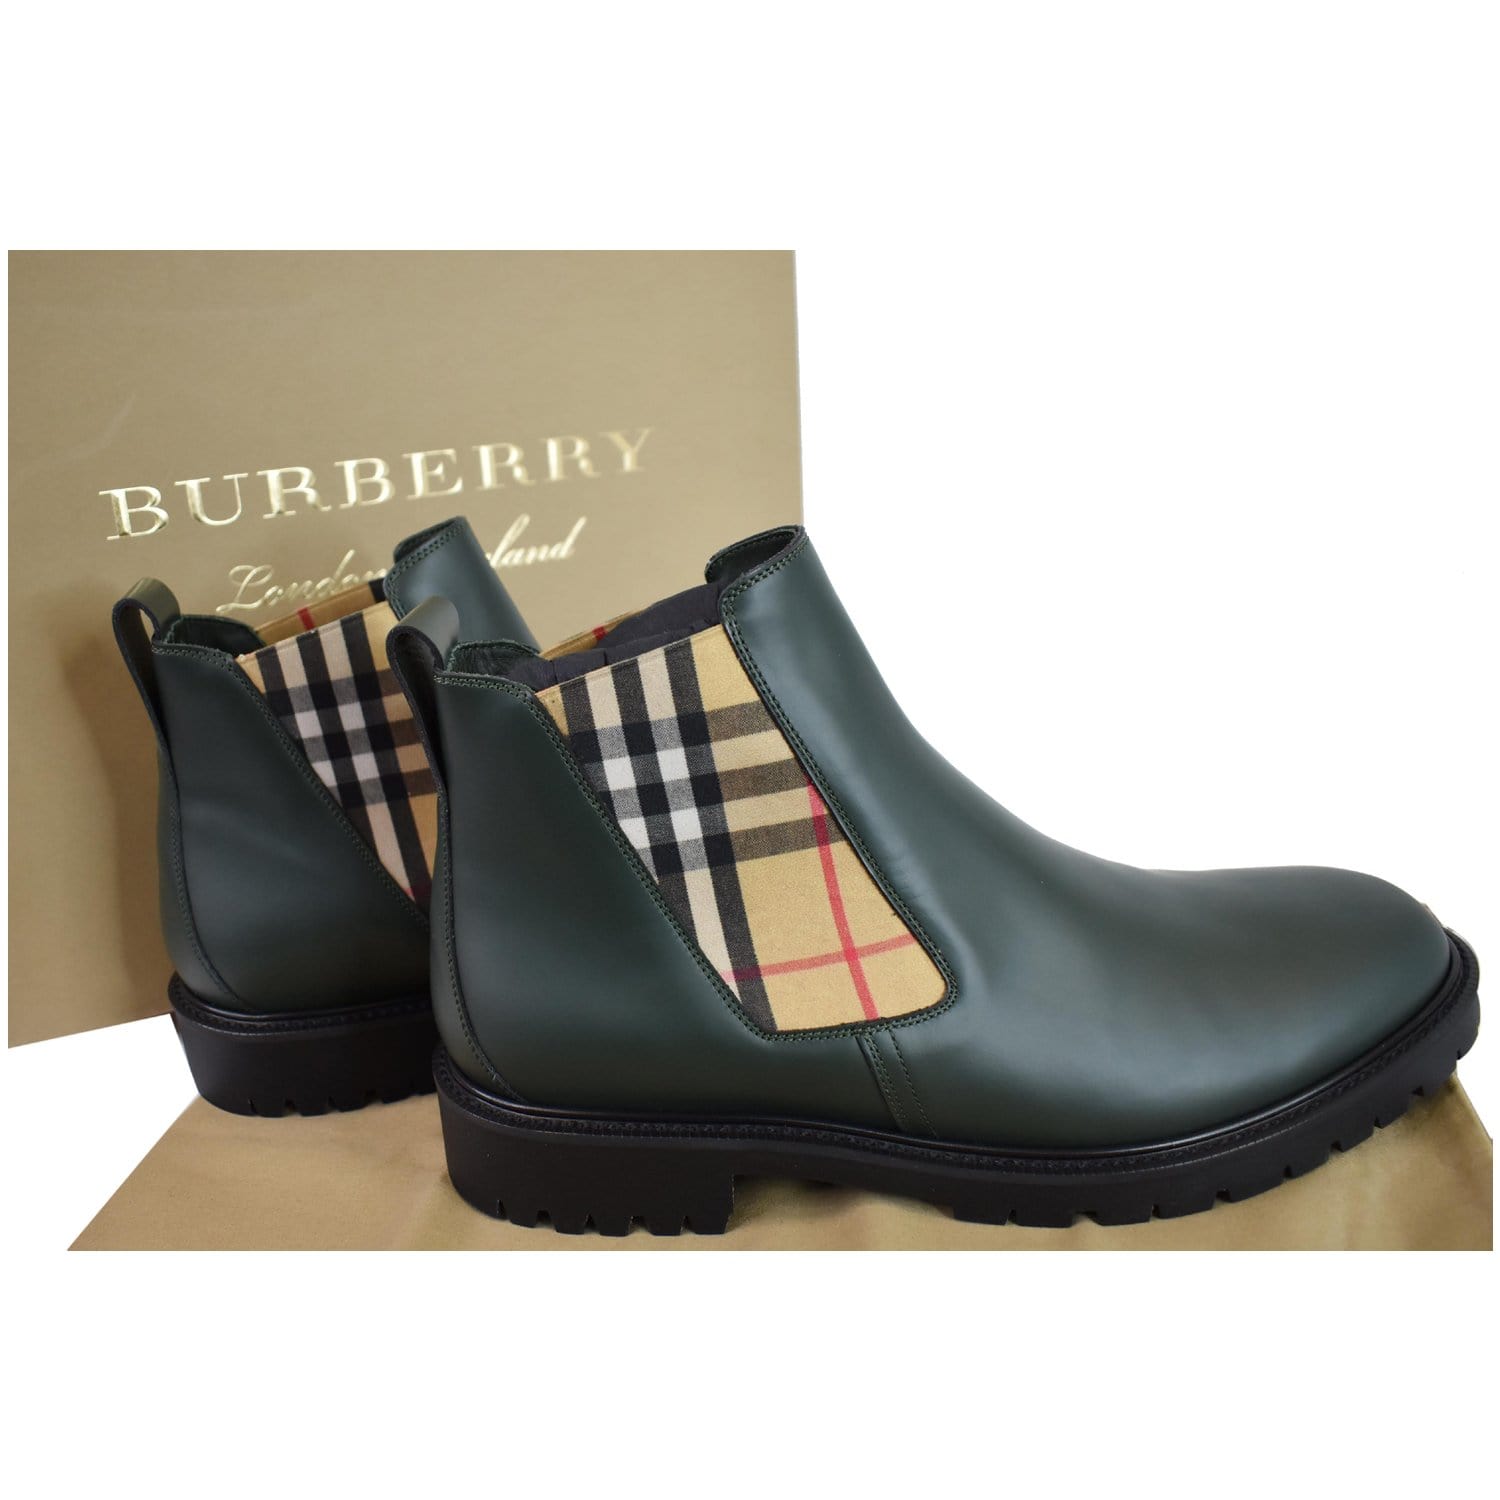 Burberry - Leather Check Boots, Men, Black